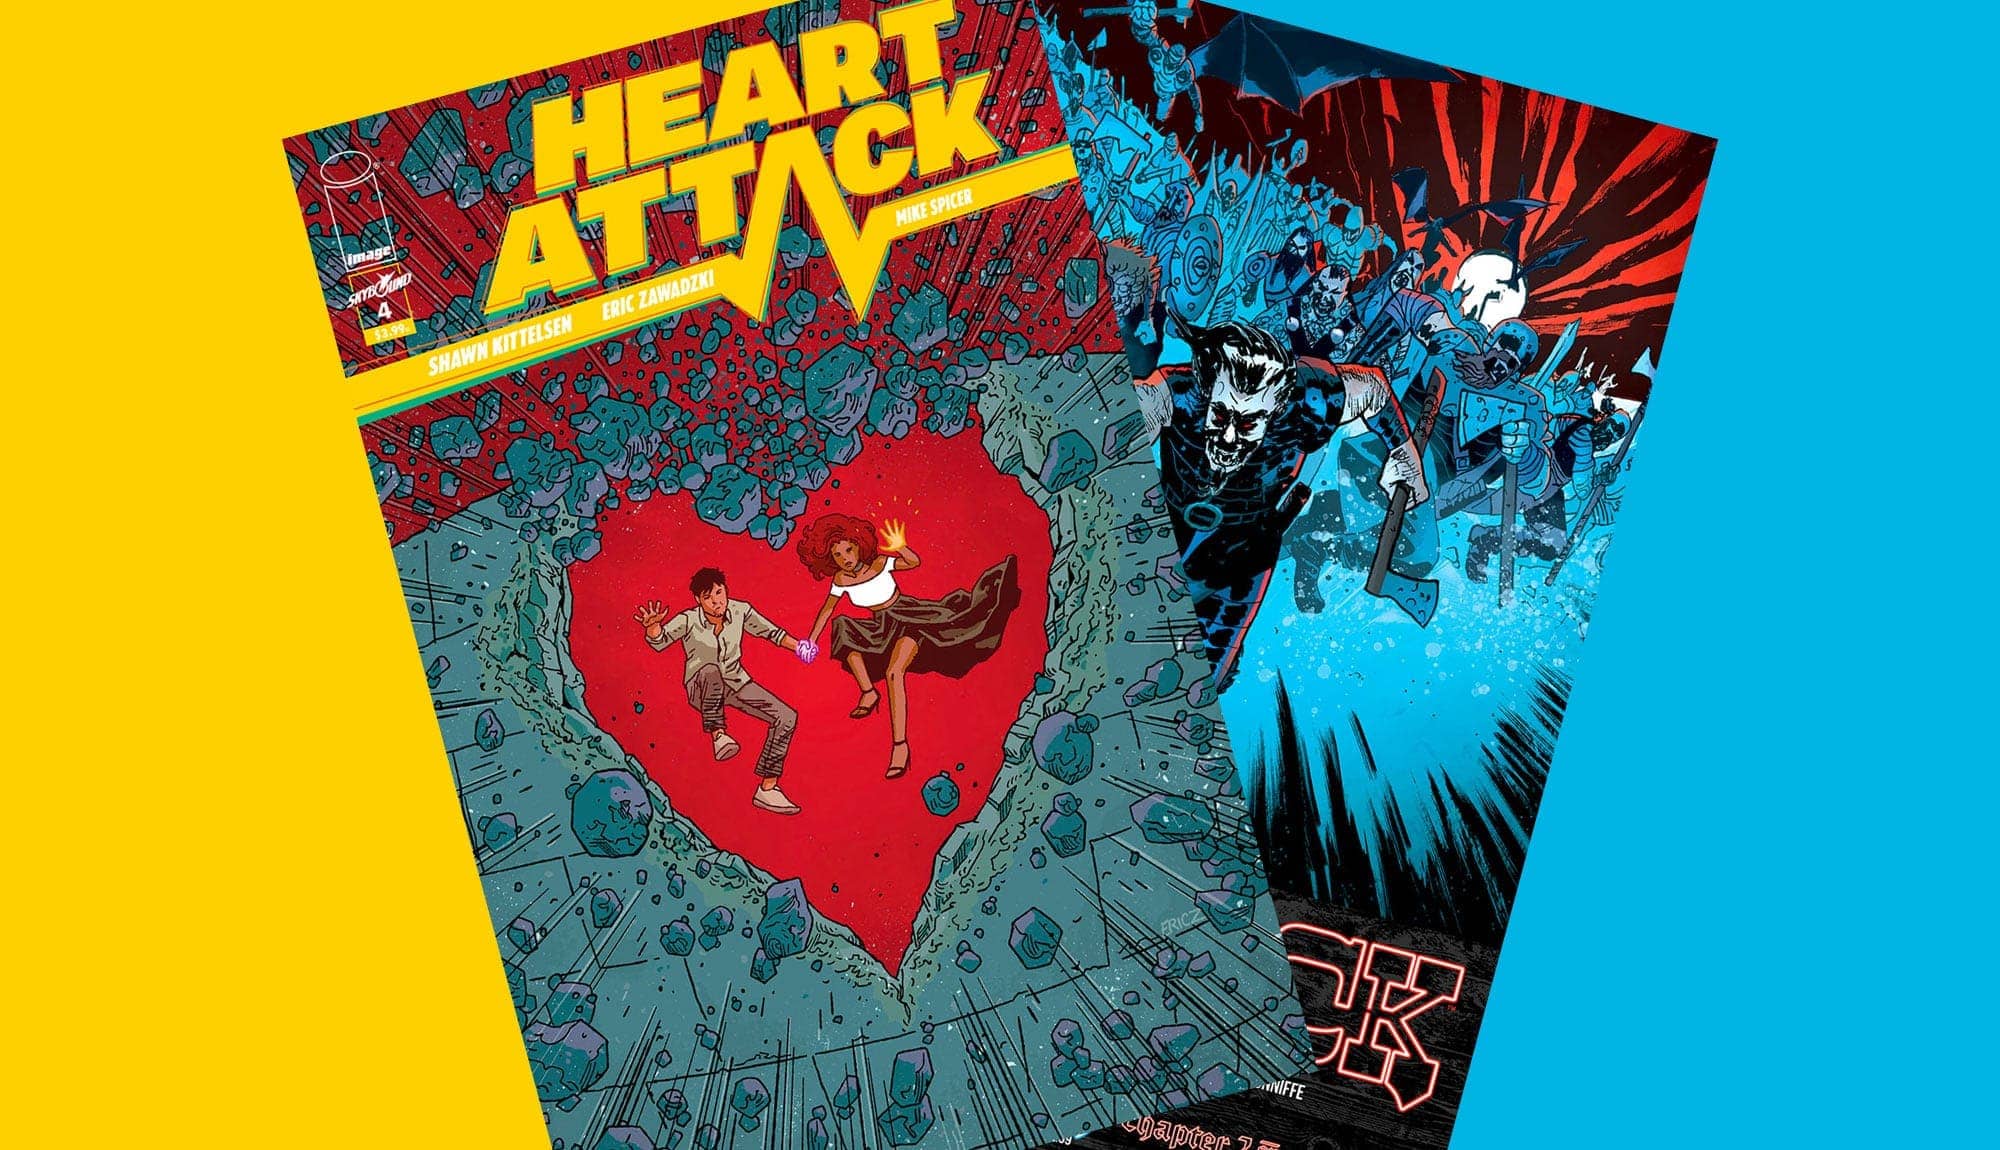 This Week’s Comics: HEART ATTACK and REDNECK